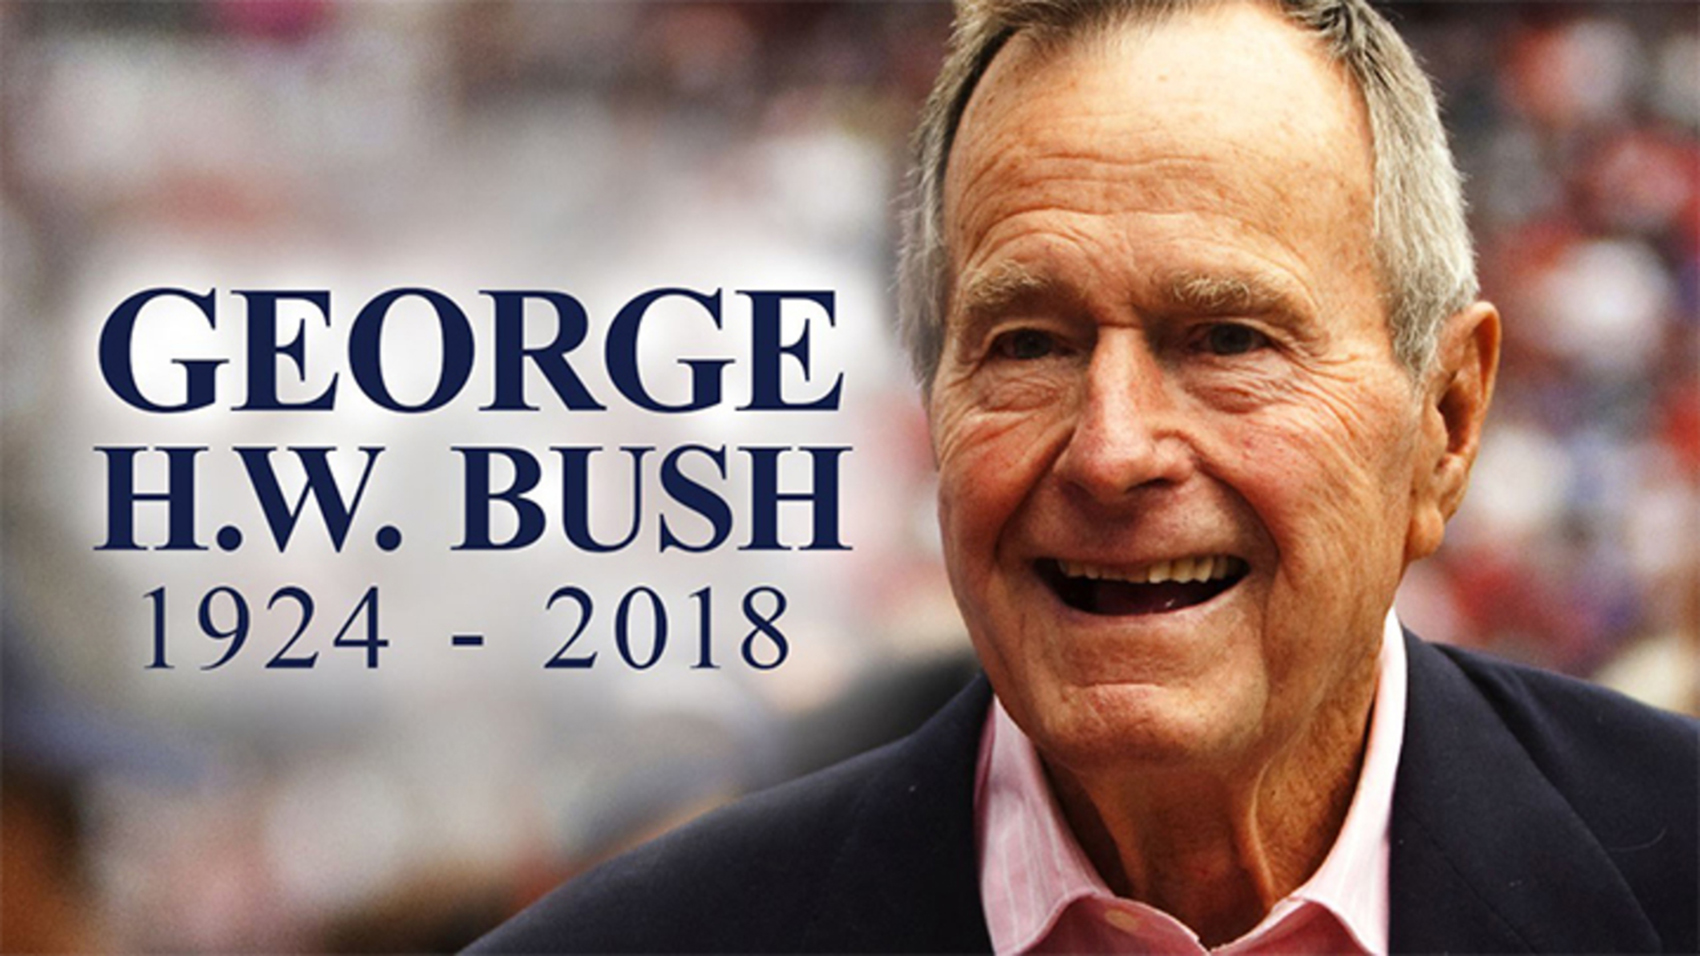 Dr. Mishoe's thoughts on President George H.W. Bush